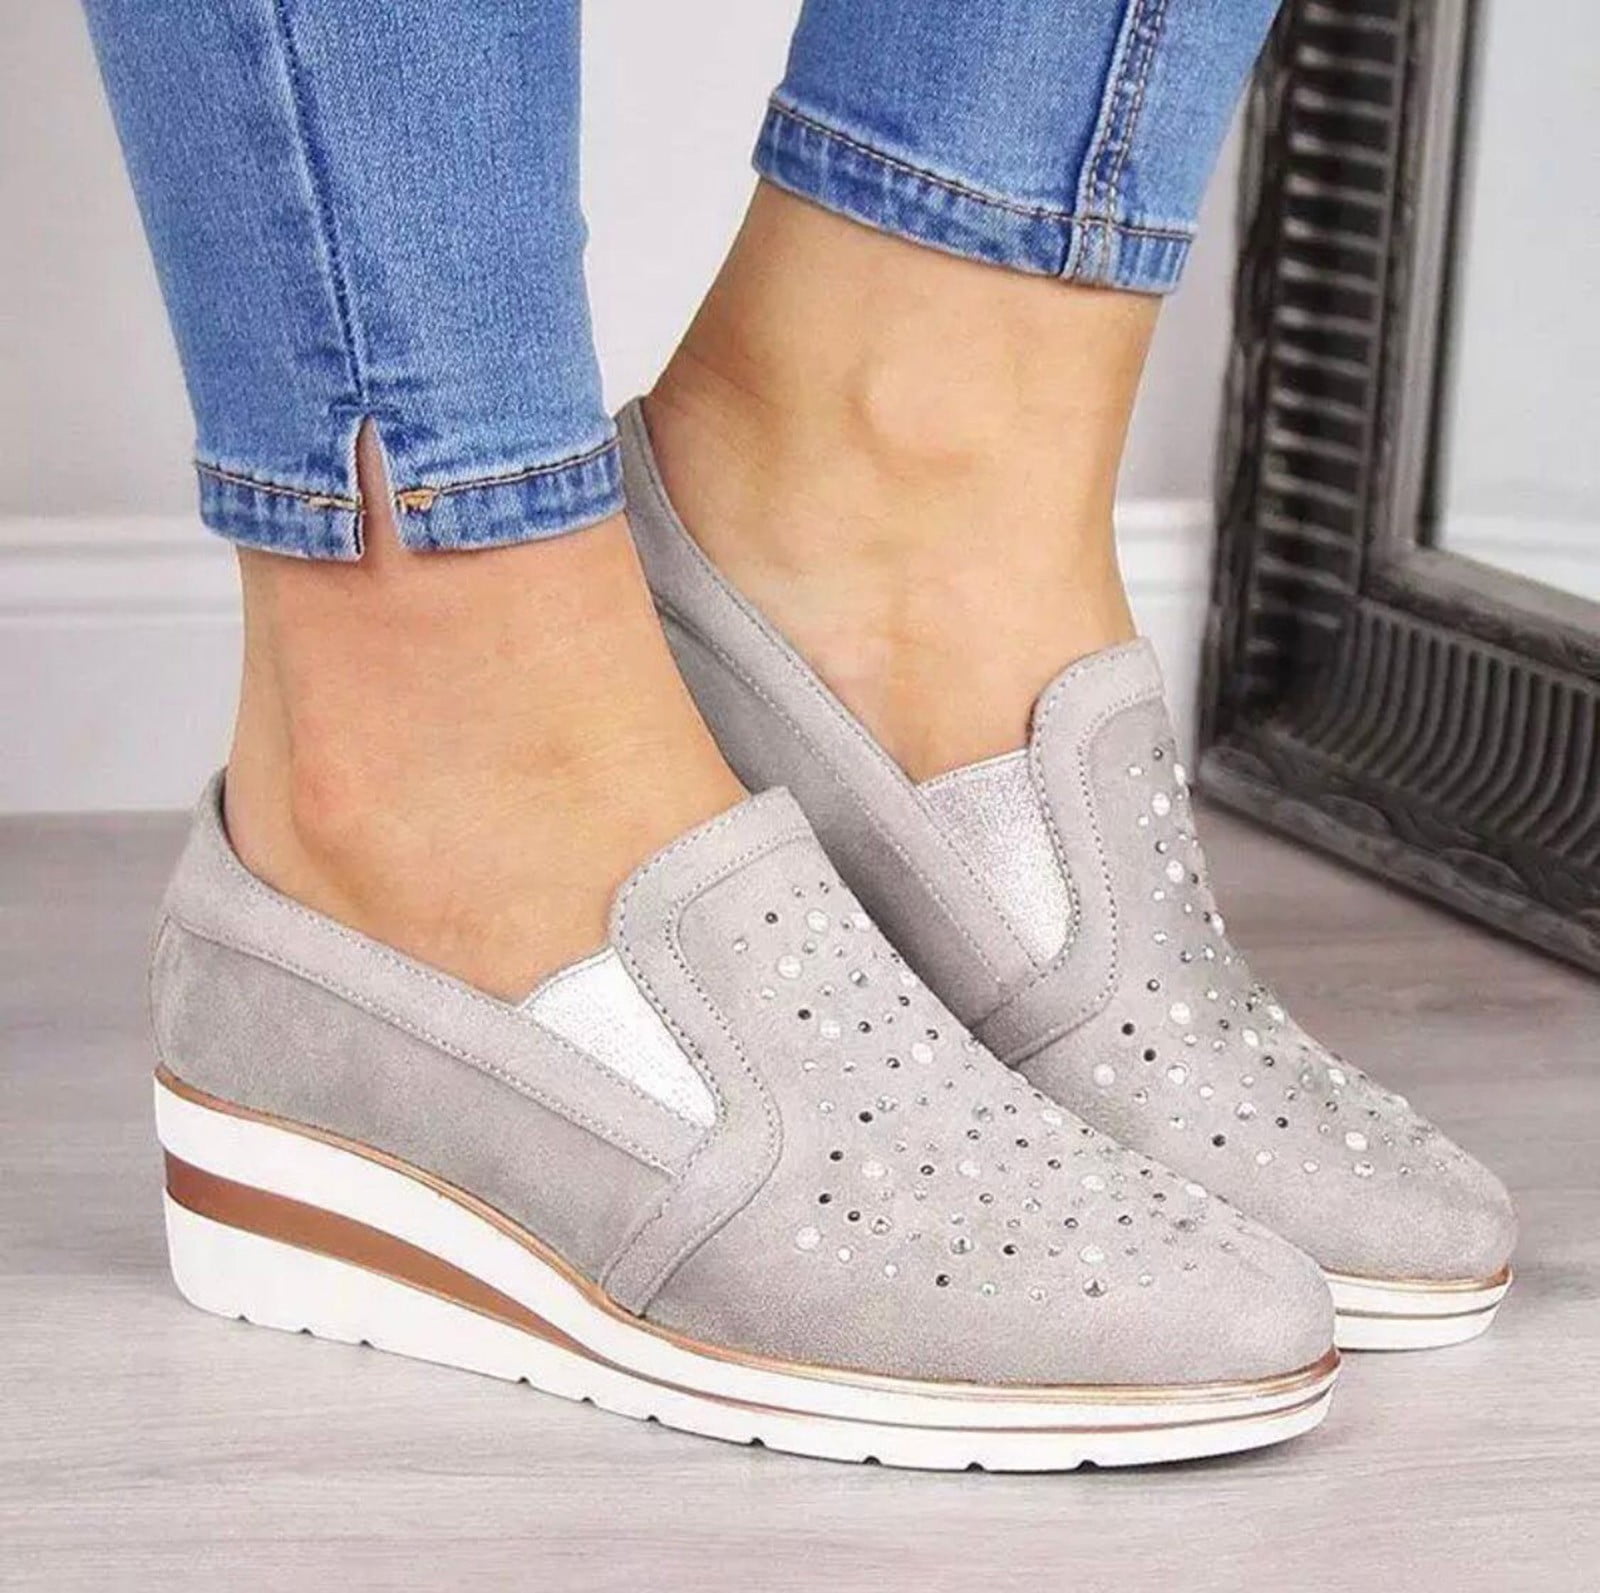 women's Muffin Sneakers Sequin Slip On Casual Shoes Round Toe Bling Bling  Contrast Paneled Low Heel Sequin Slip On Sneakers - AliExpress